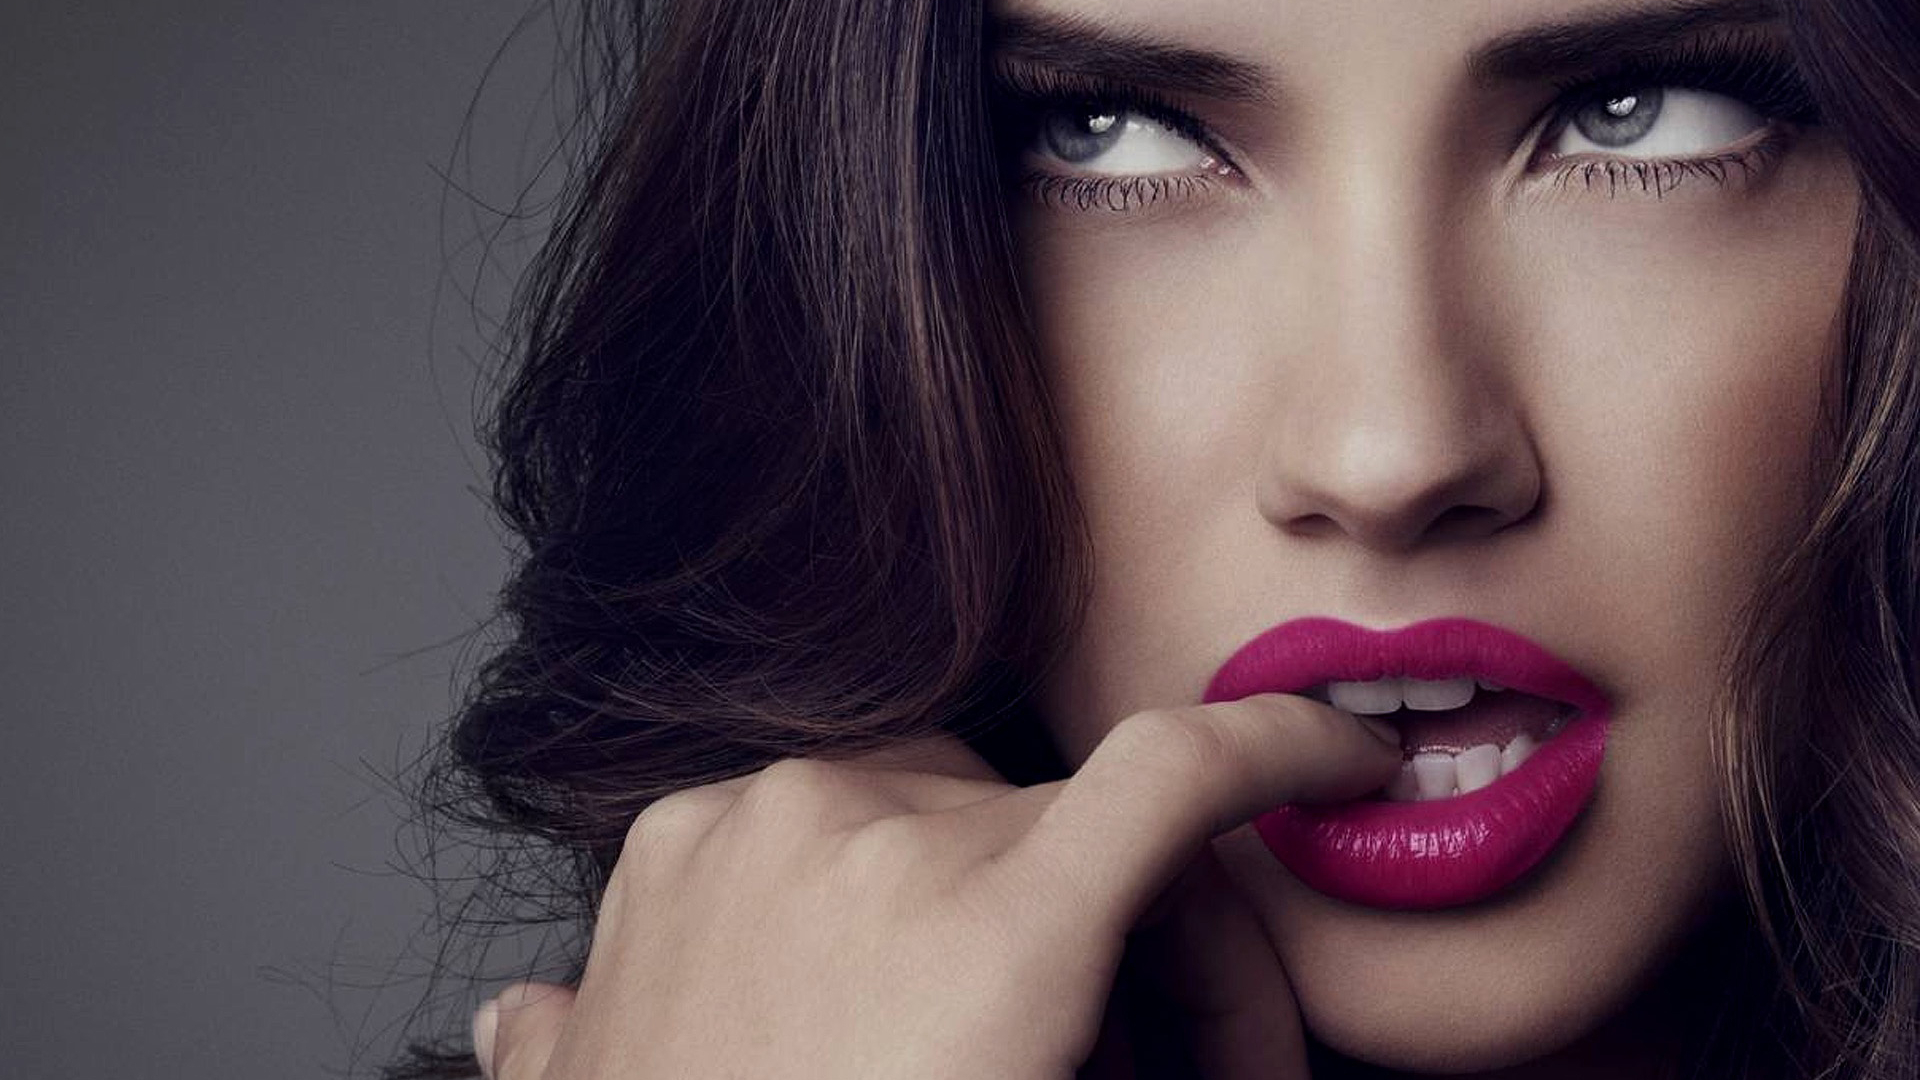 Adriana Lima, the stunning celebrity, captivates in this desktop wallpaper.